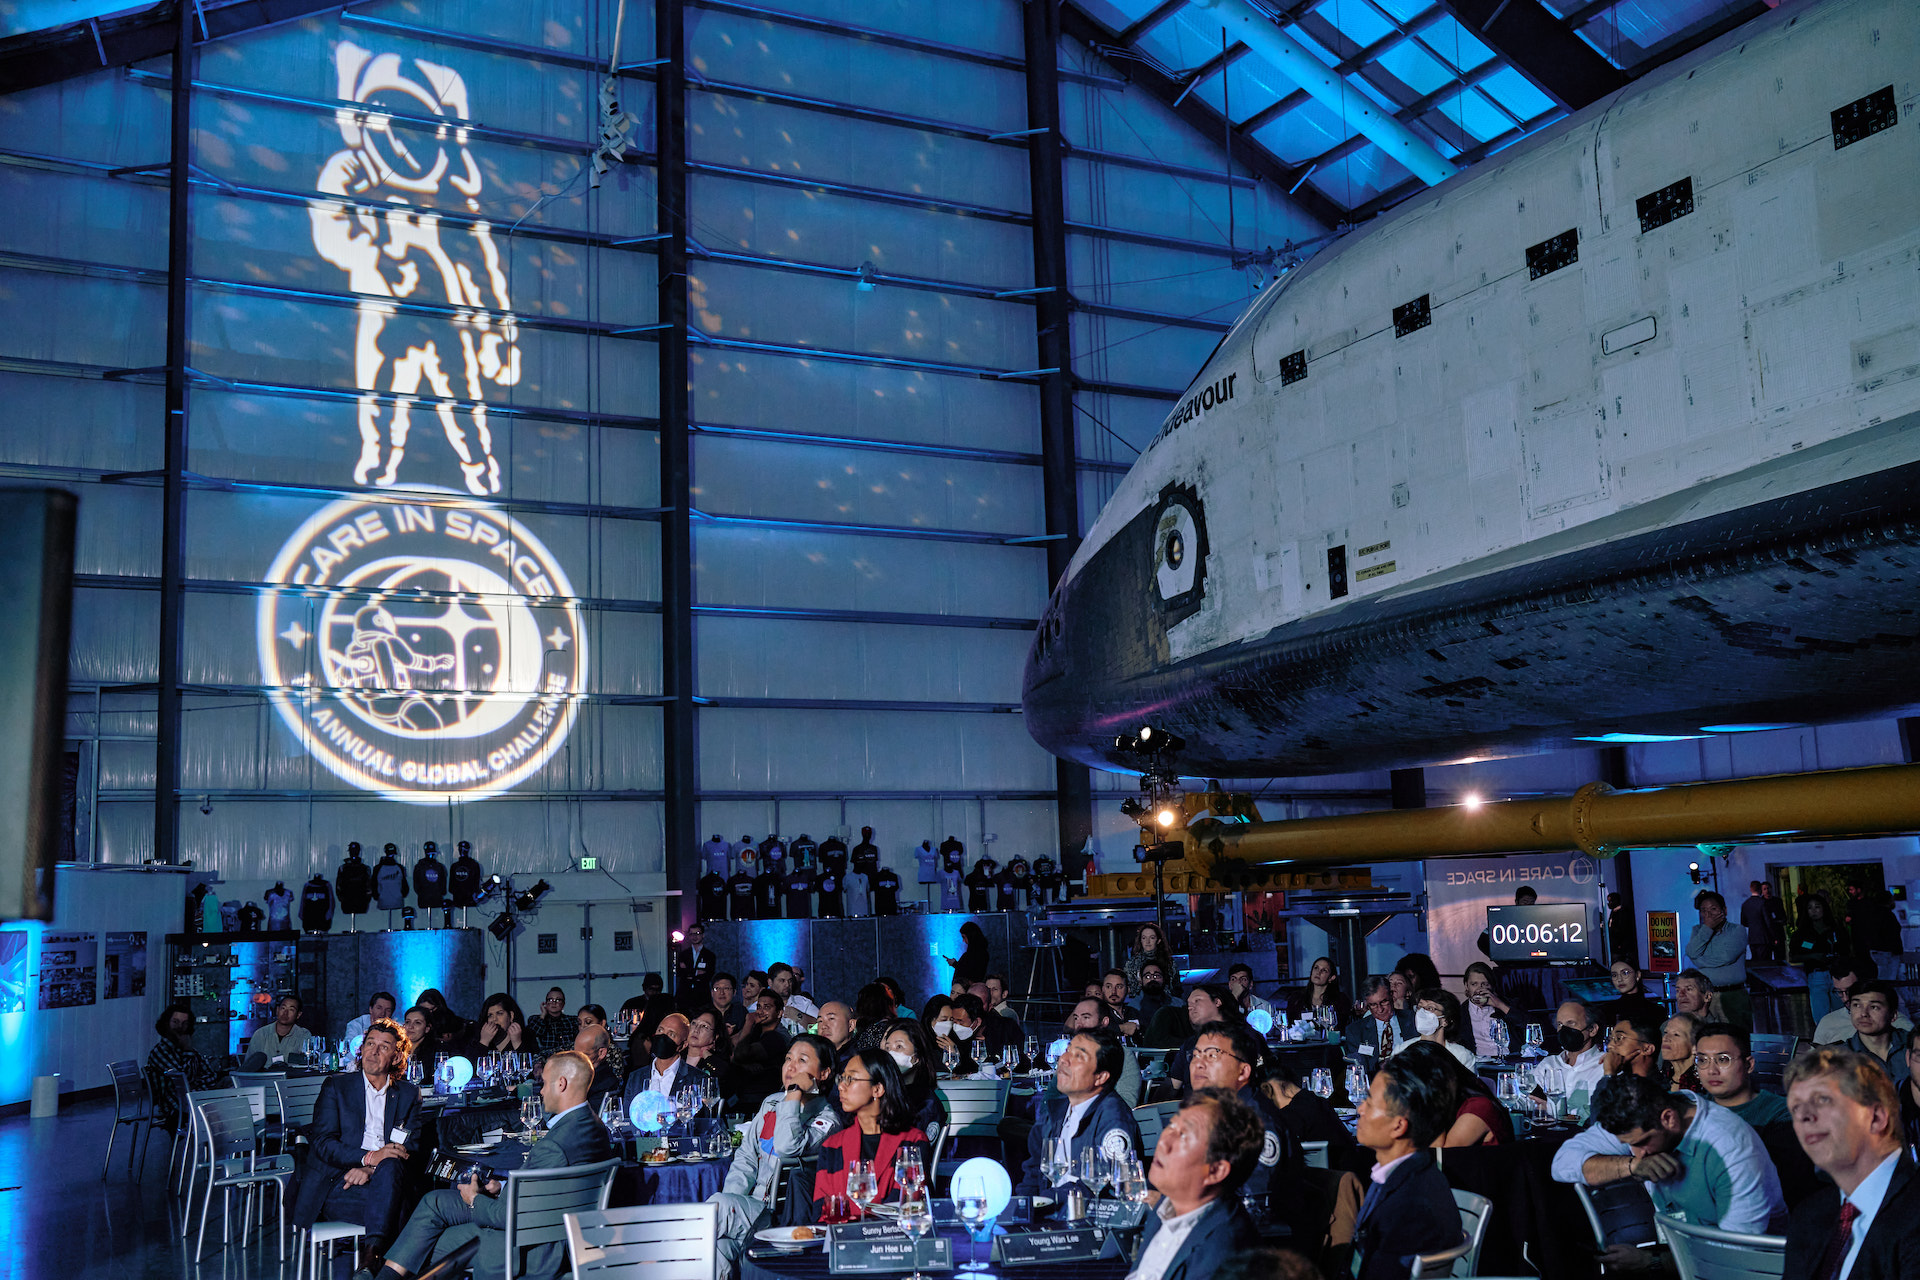 A crowd, seated around several tables, stairs up at something out of frame. Behind them, the forward body and nose of Space Shuttle Endeavour enters from the right and fills the top right quarter of the image. In the background to the left, projected against the wall, a large astronaut stands above the circular Care in Space logo patch.